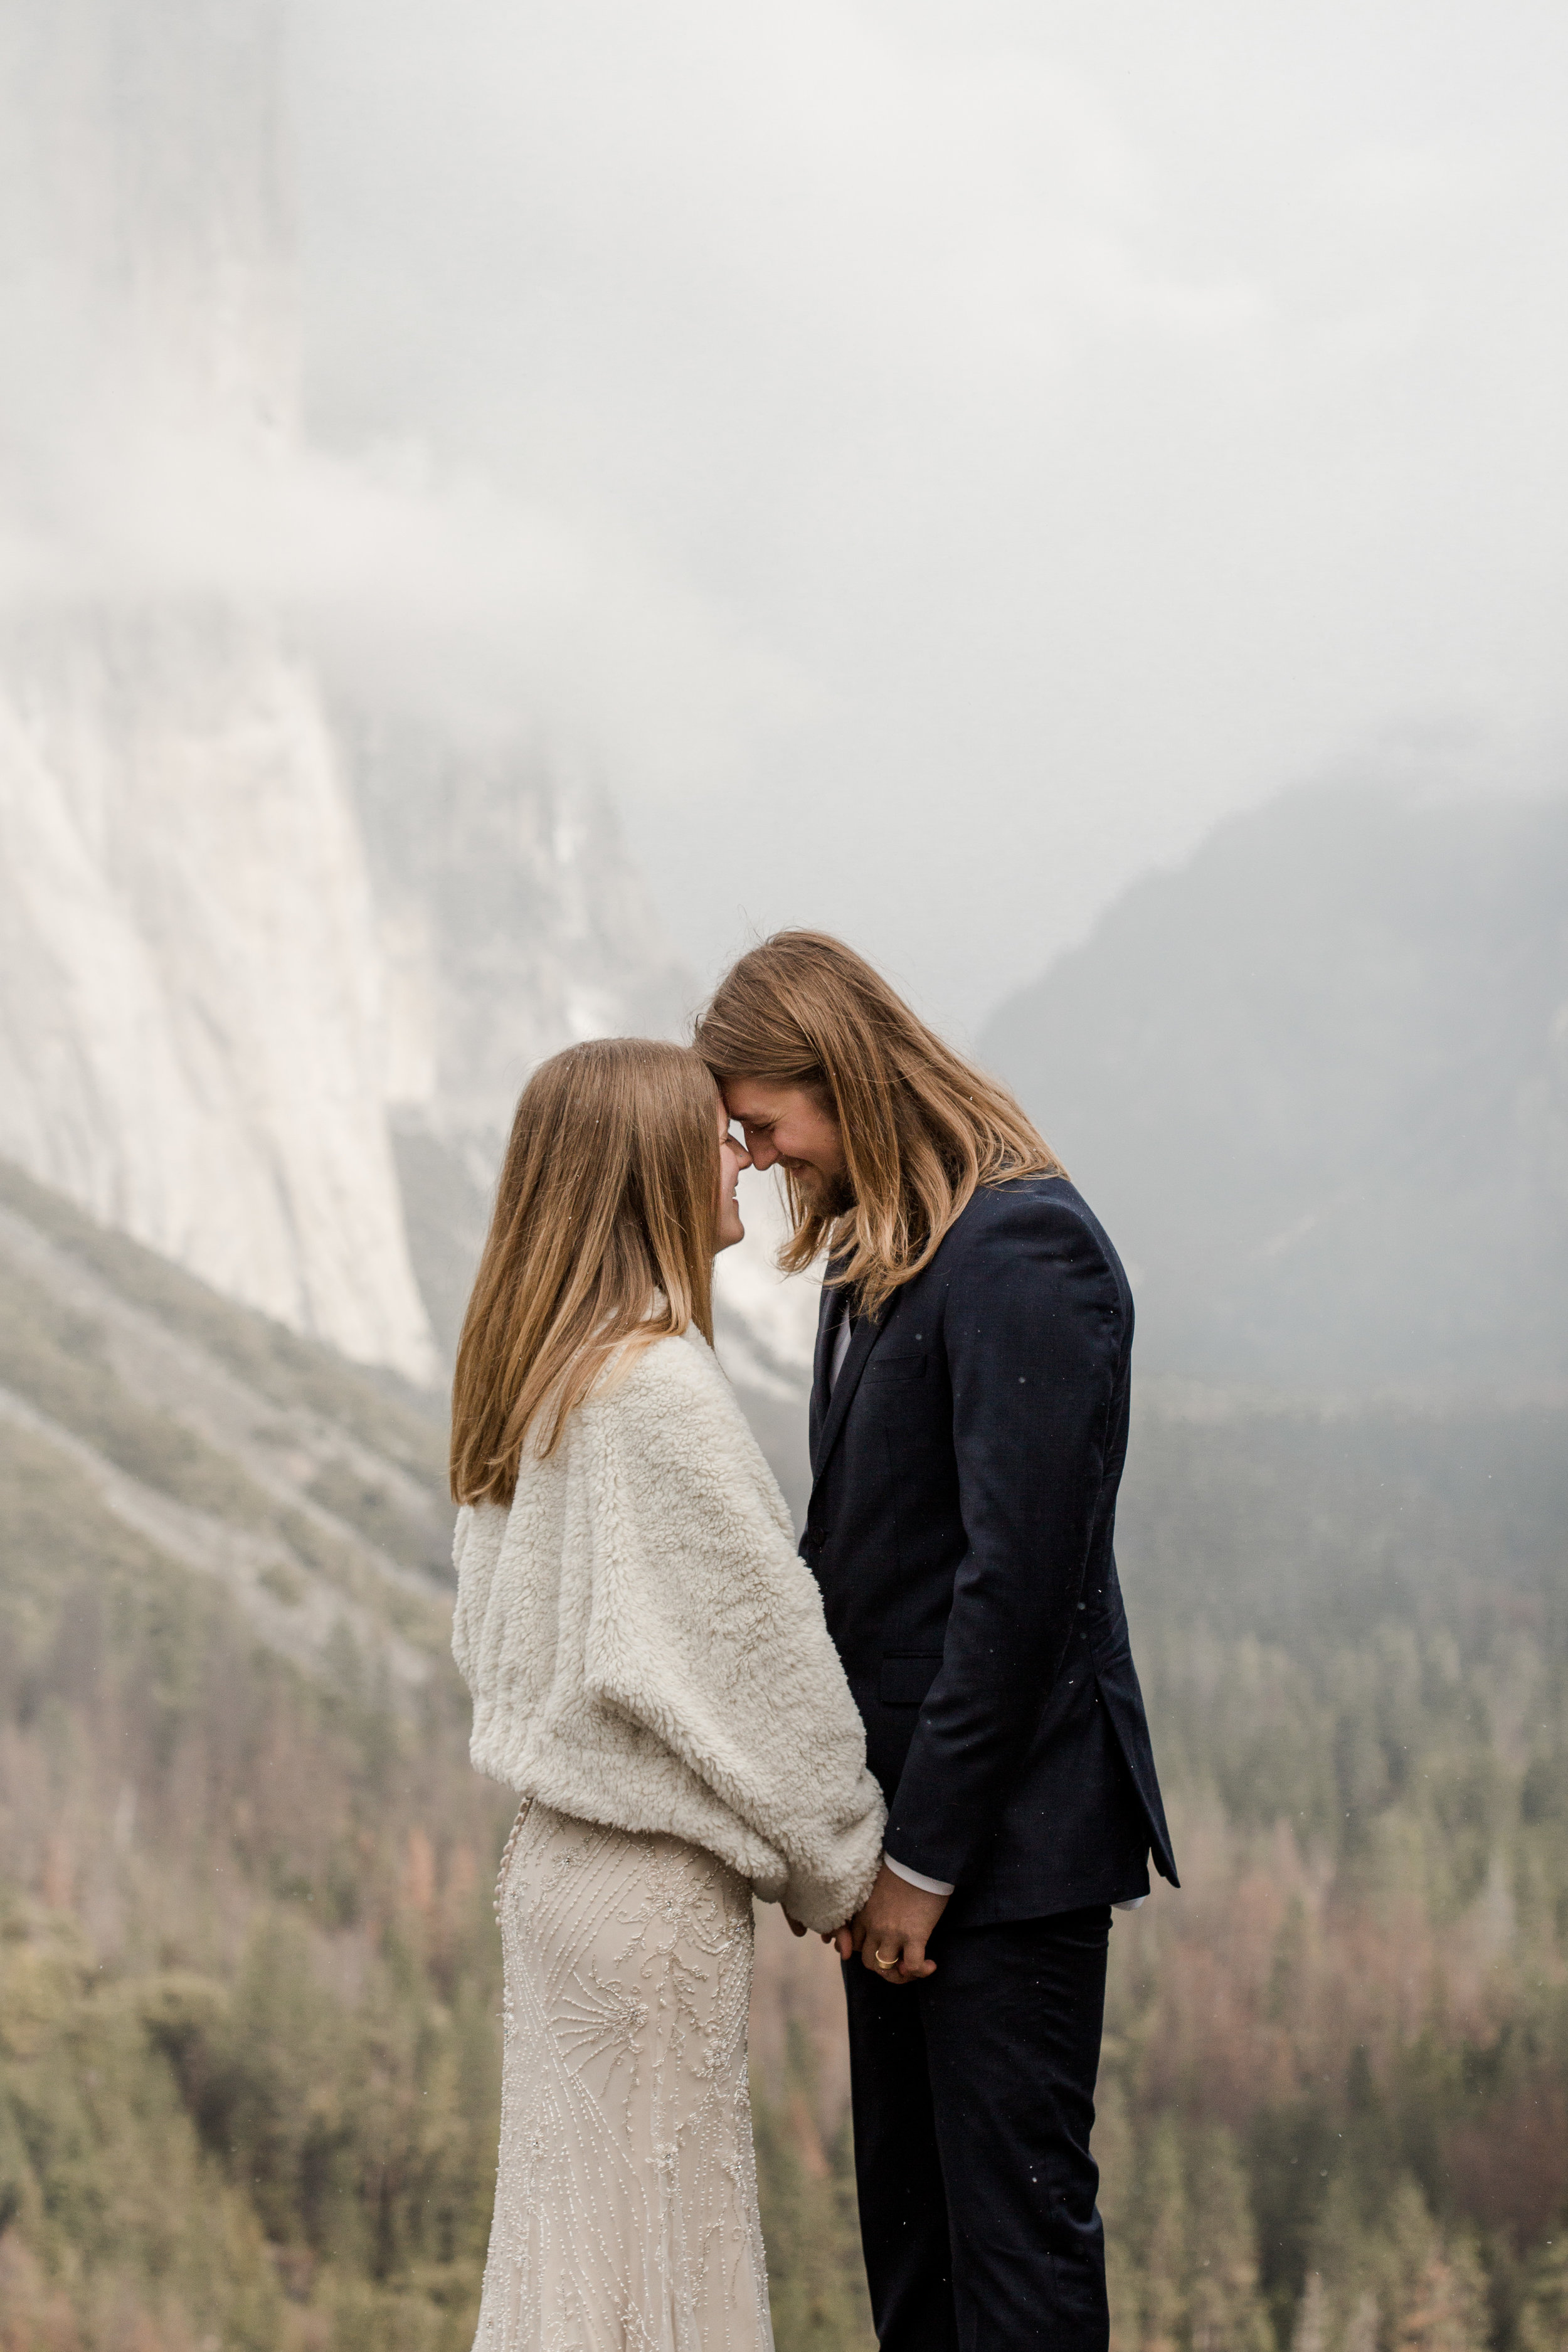 nicole-daacke-photography-yousemite-national-park-elopement-photographer-winter-cloud-moody-elope-inspiration-yosemite-valley-tunnel-view-winter-cloud-fog-weather-wedding-photos-1.jpg